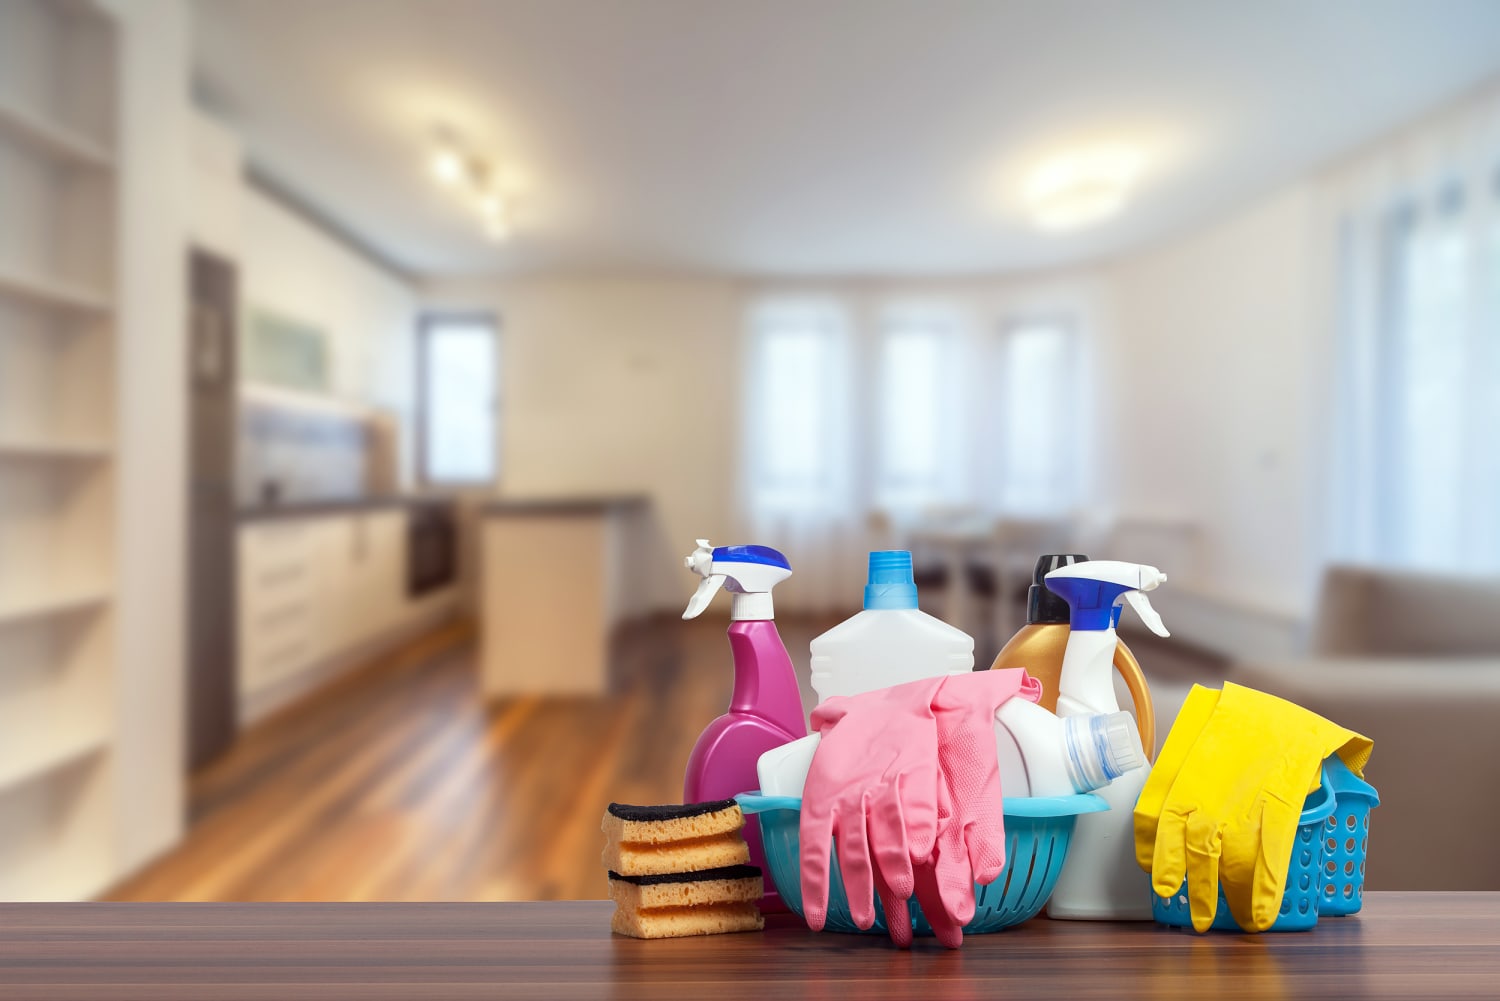 Spring Cleaning Checklist: A Room-by-Room Cleaning Guide